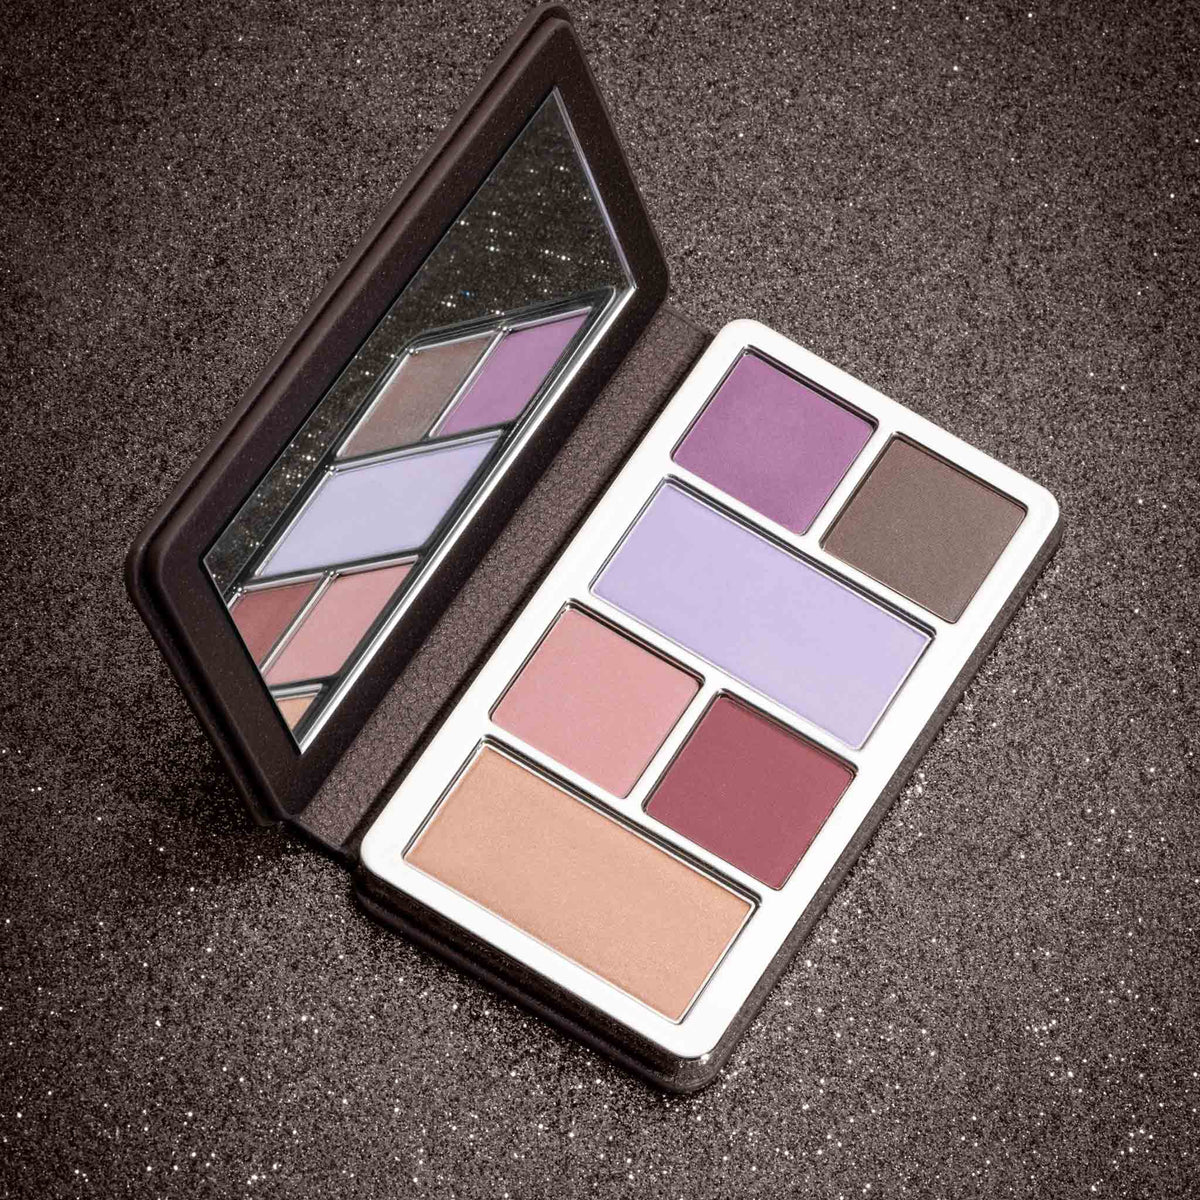 Lune+Aster Violet Solstice Eyeshadow Palette (Limited Edition) . This product is in the color multi